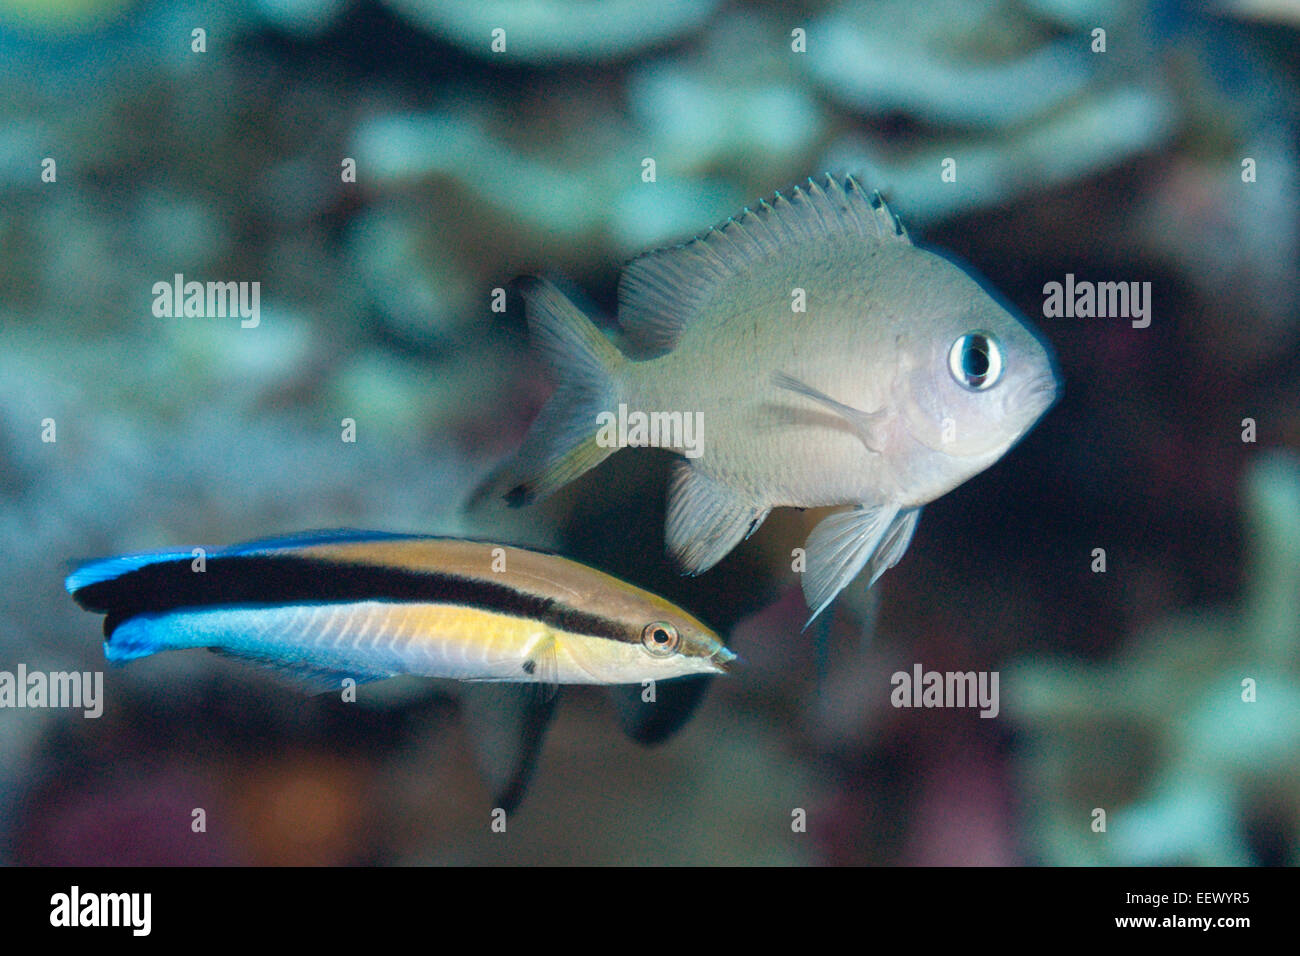 Cleaner Wrasse cleaning Damsel, Labroides dimidatus, Kai Islands, Moluccas, Indonesia Stock Photo